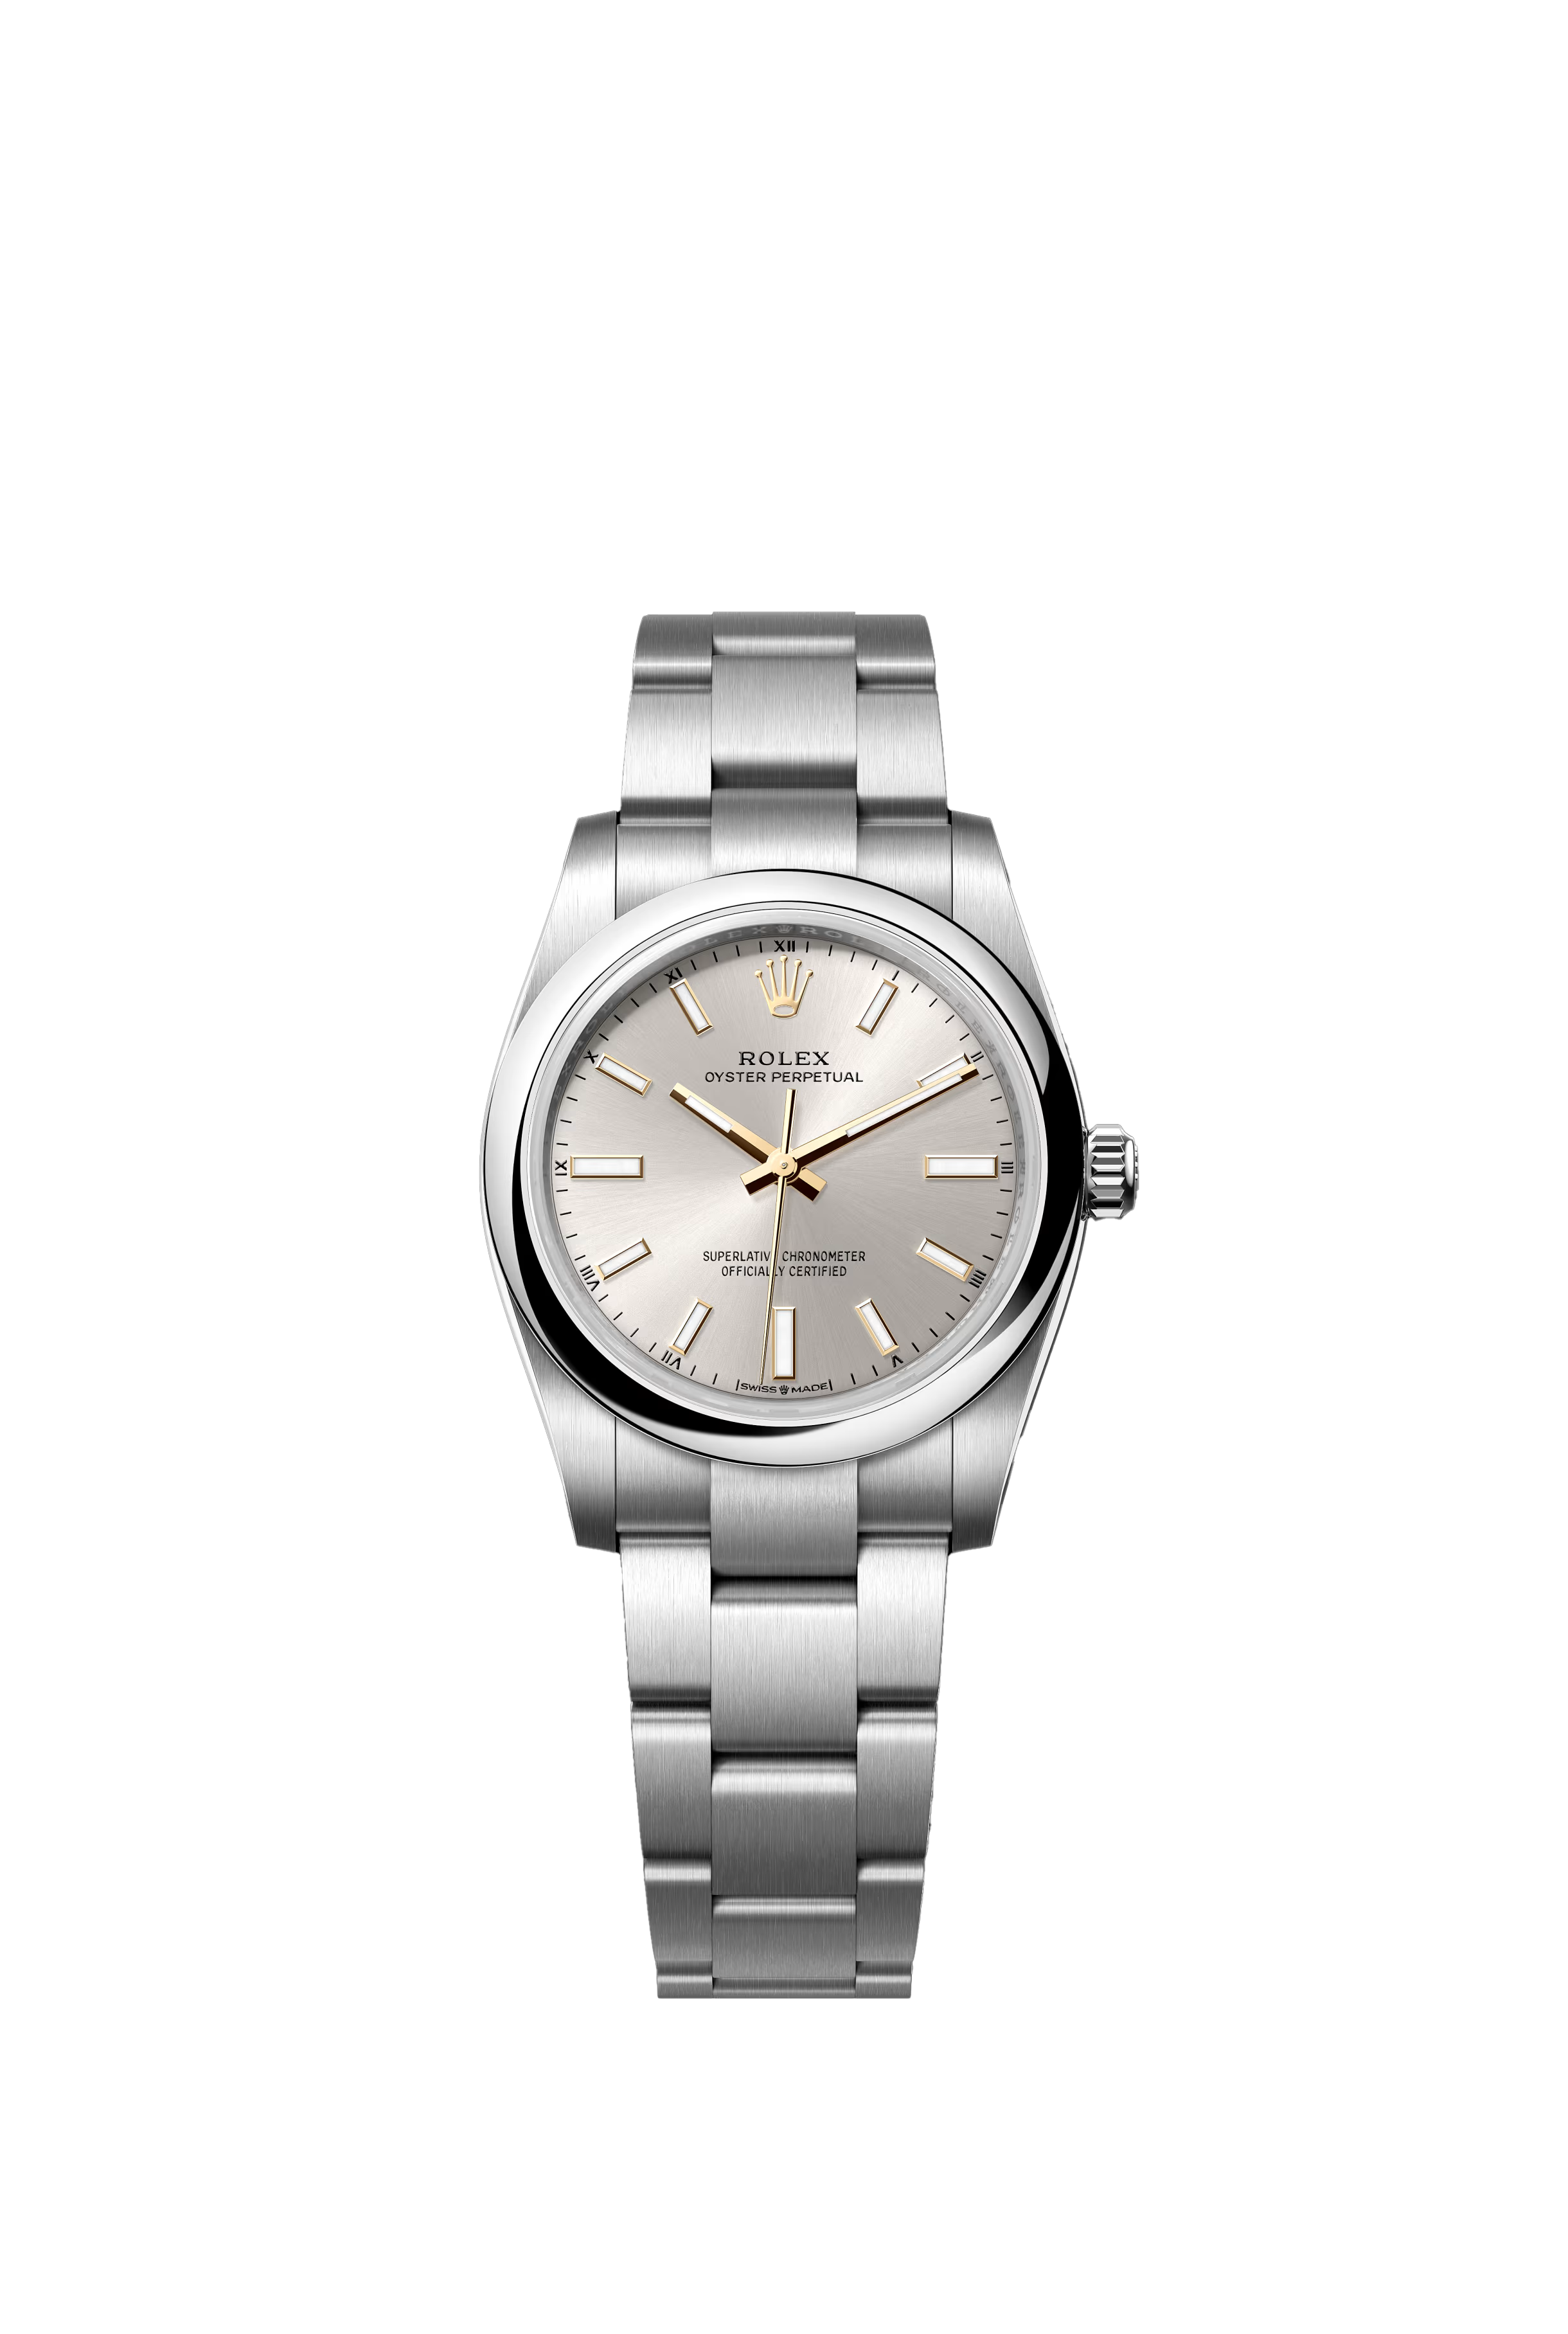 Rolex Oyster Perpetual 34 Oyster, 34 mm, Oystersteel Reference 124200